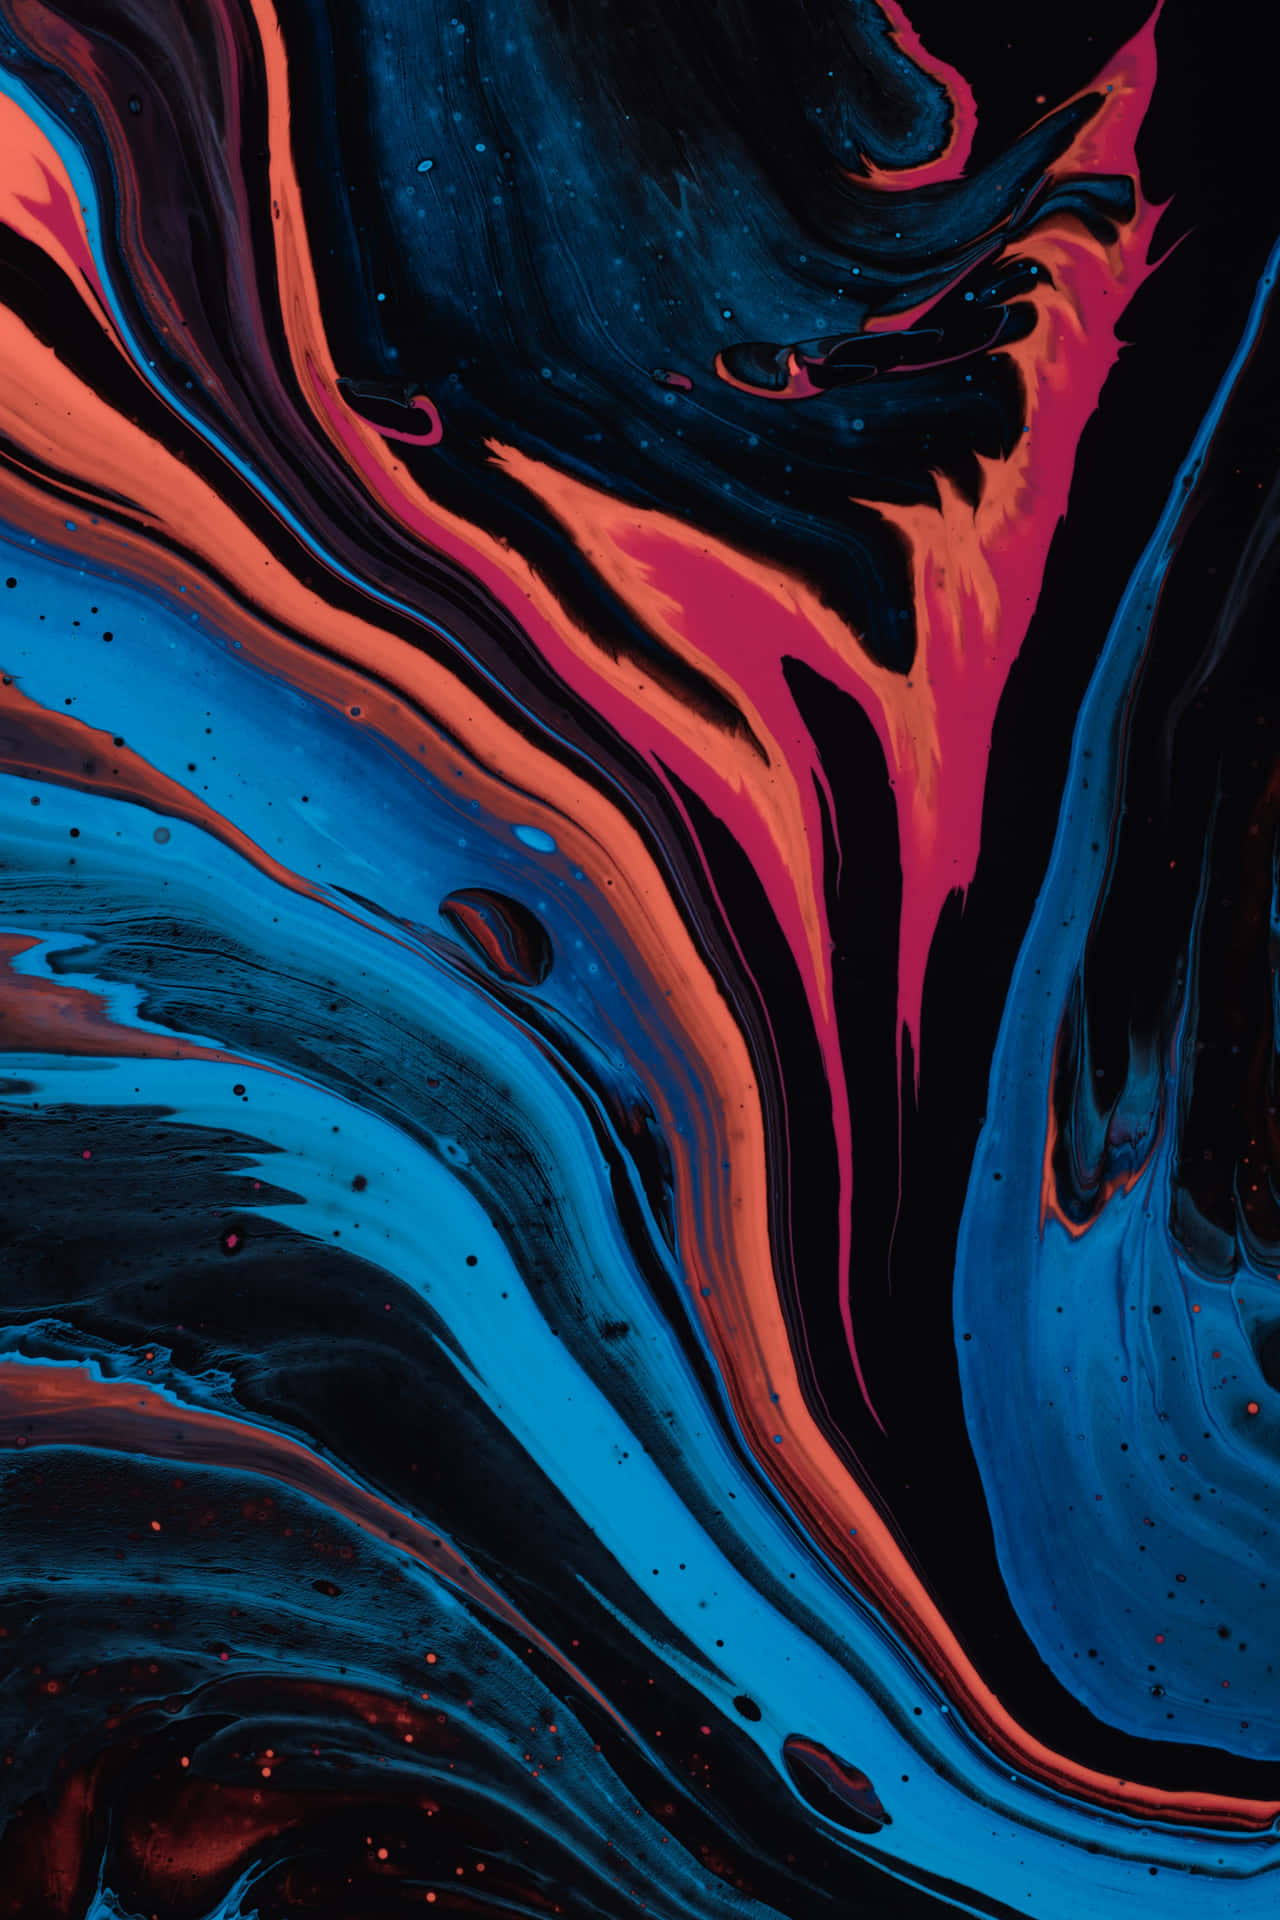 Enjoy the beauty of vibrant colors with the Colorful Phone Wallpaper